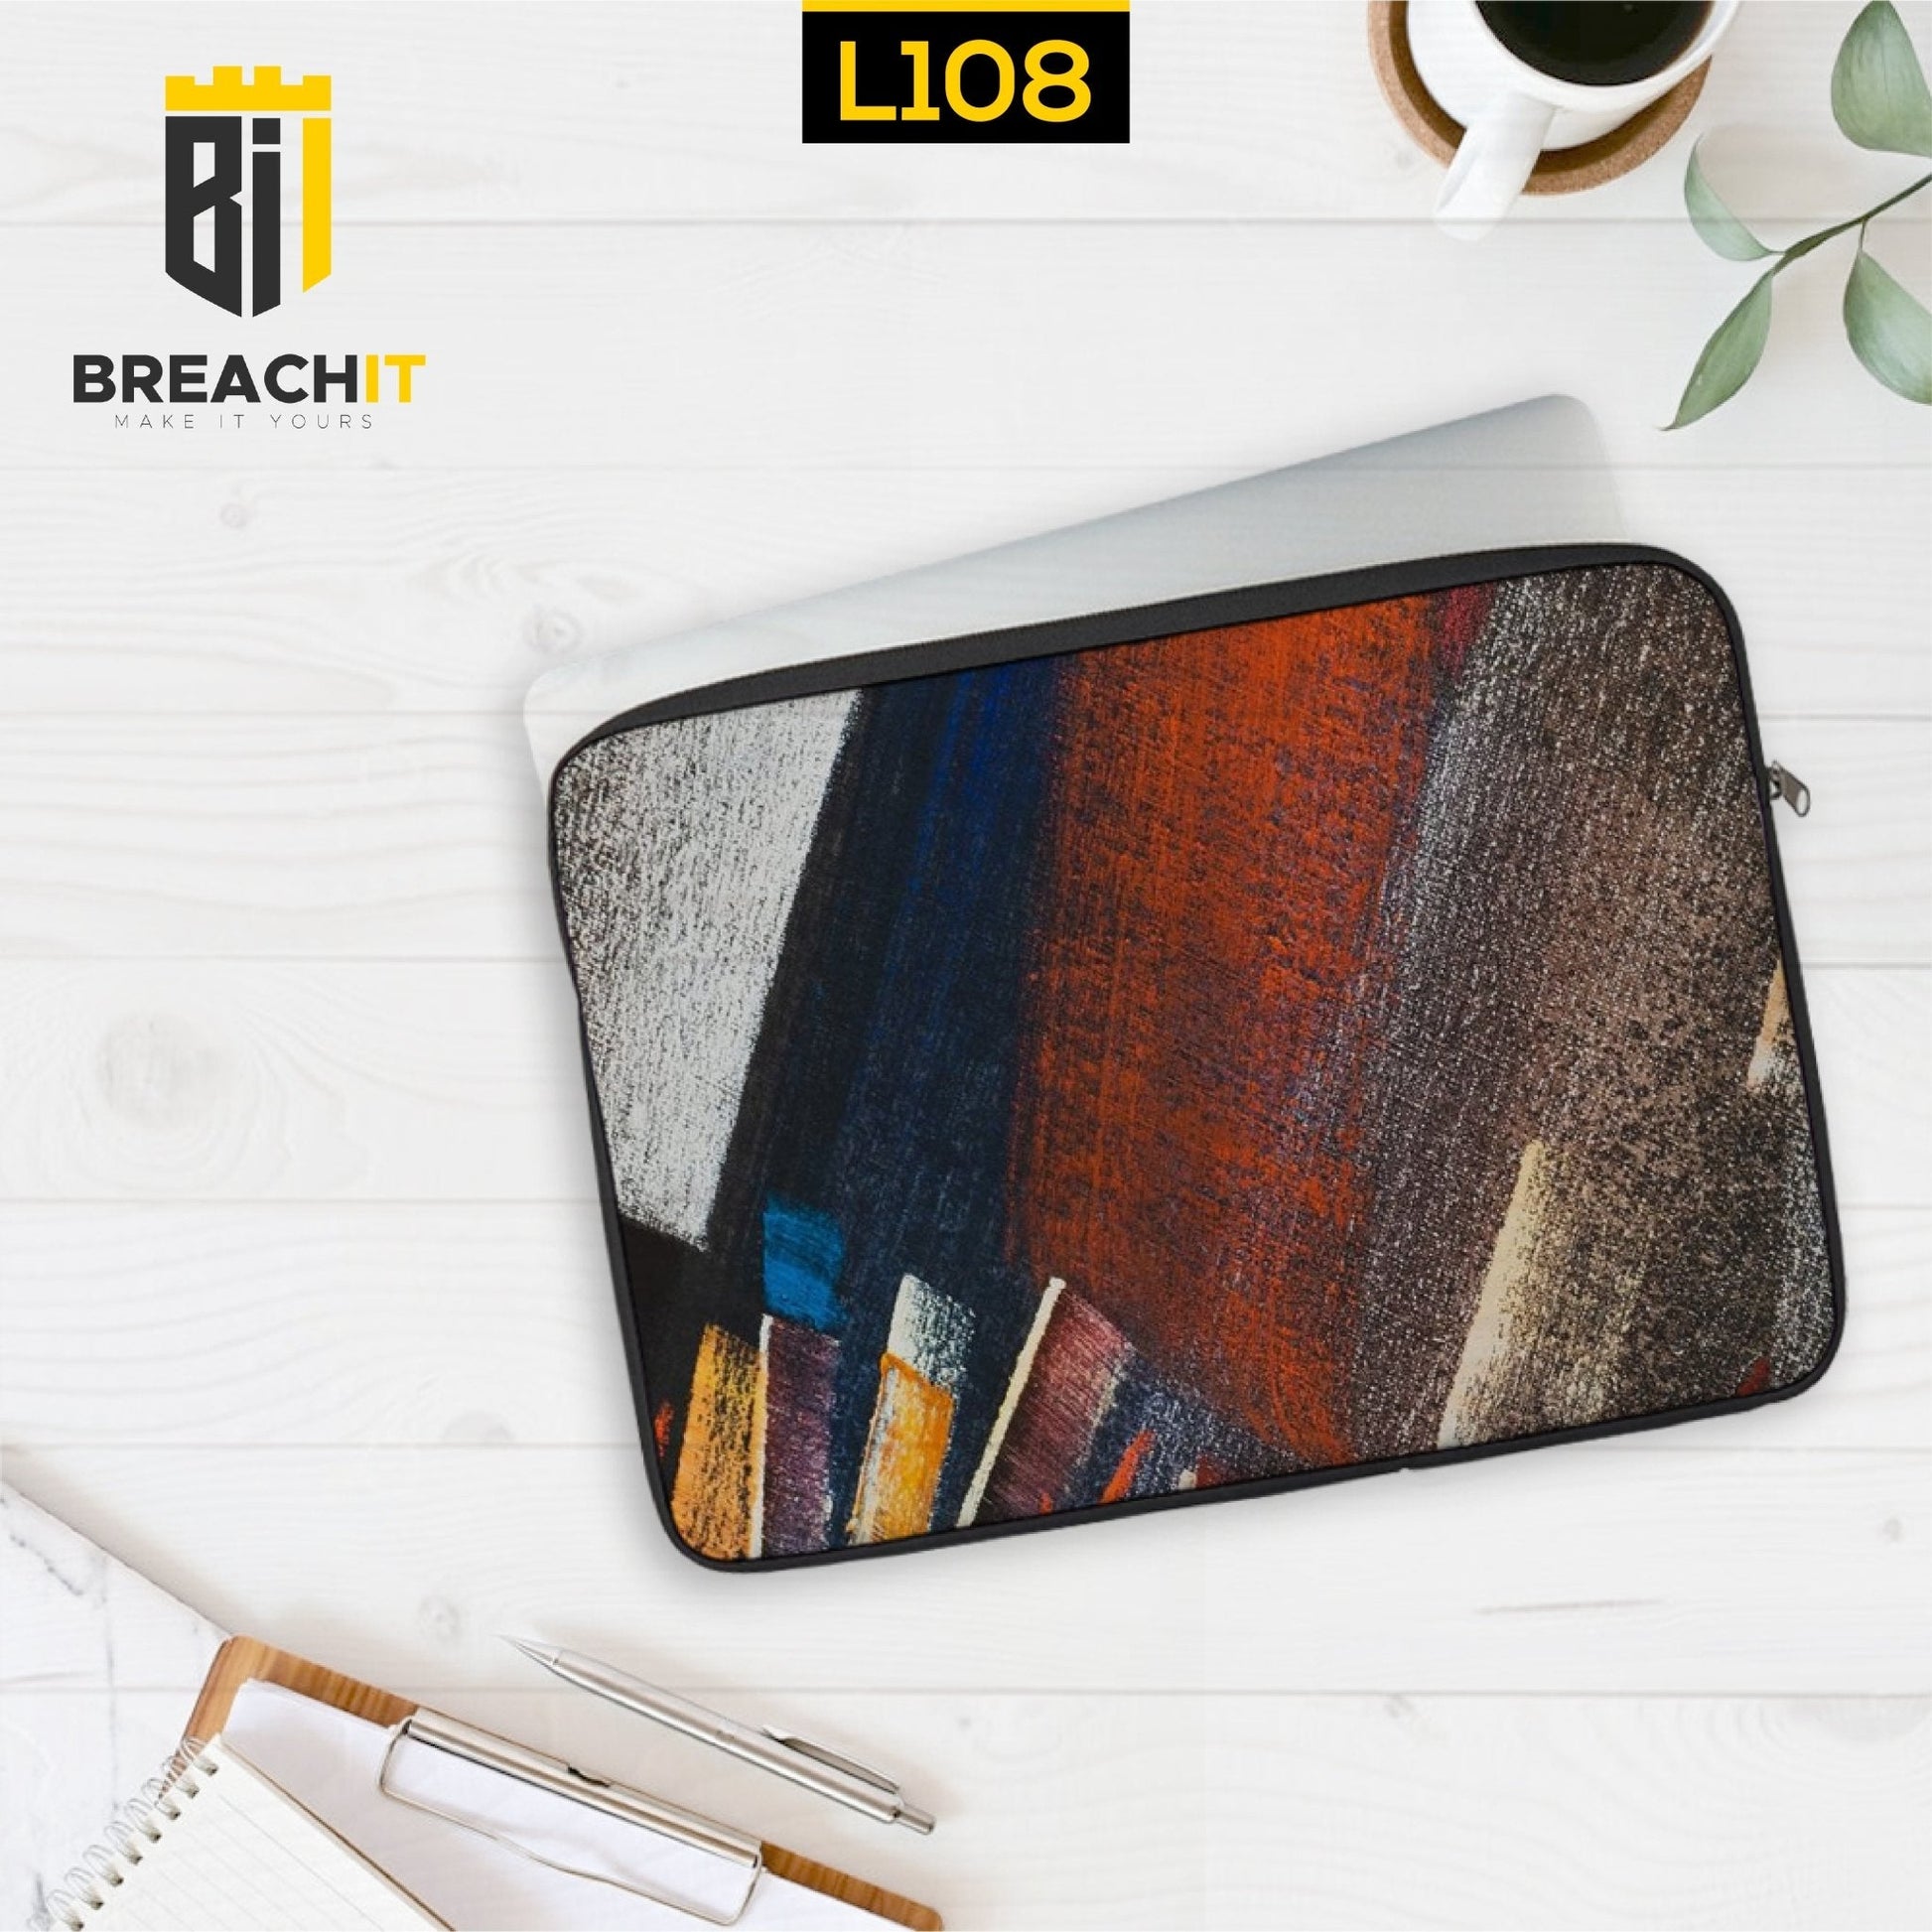 L108 Abstract Laptop Sleeve - BREACHIT